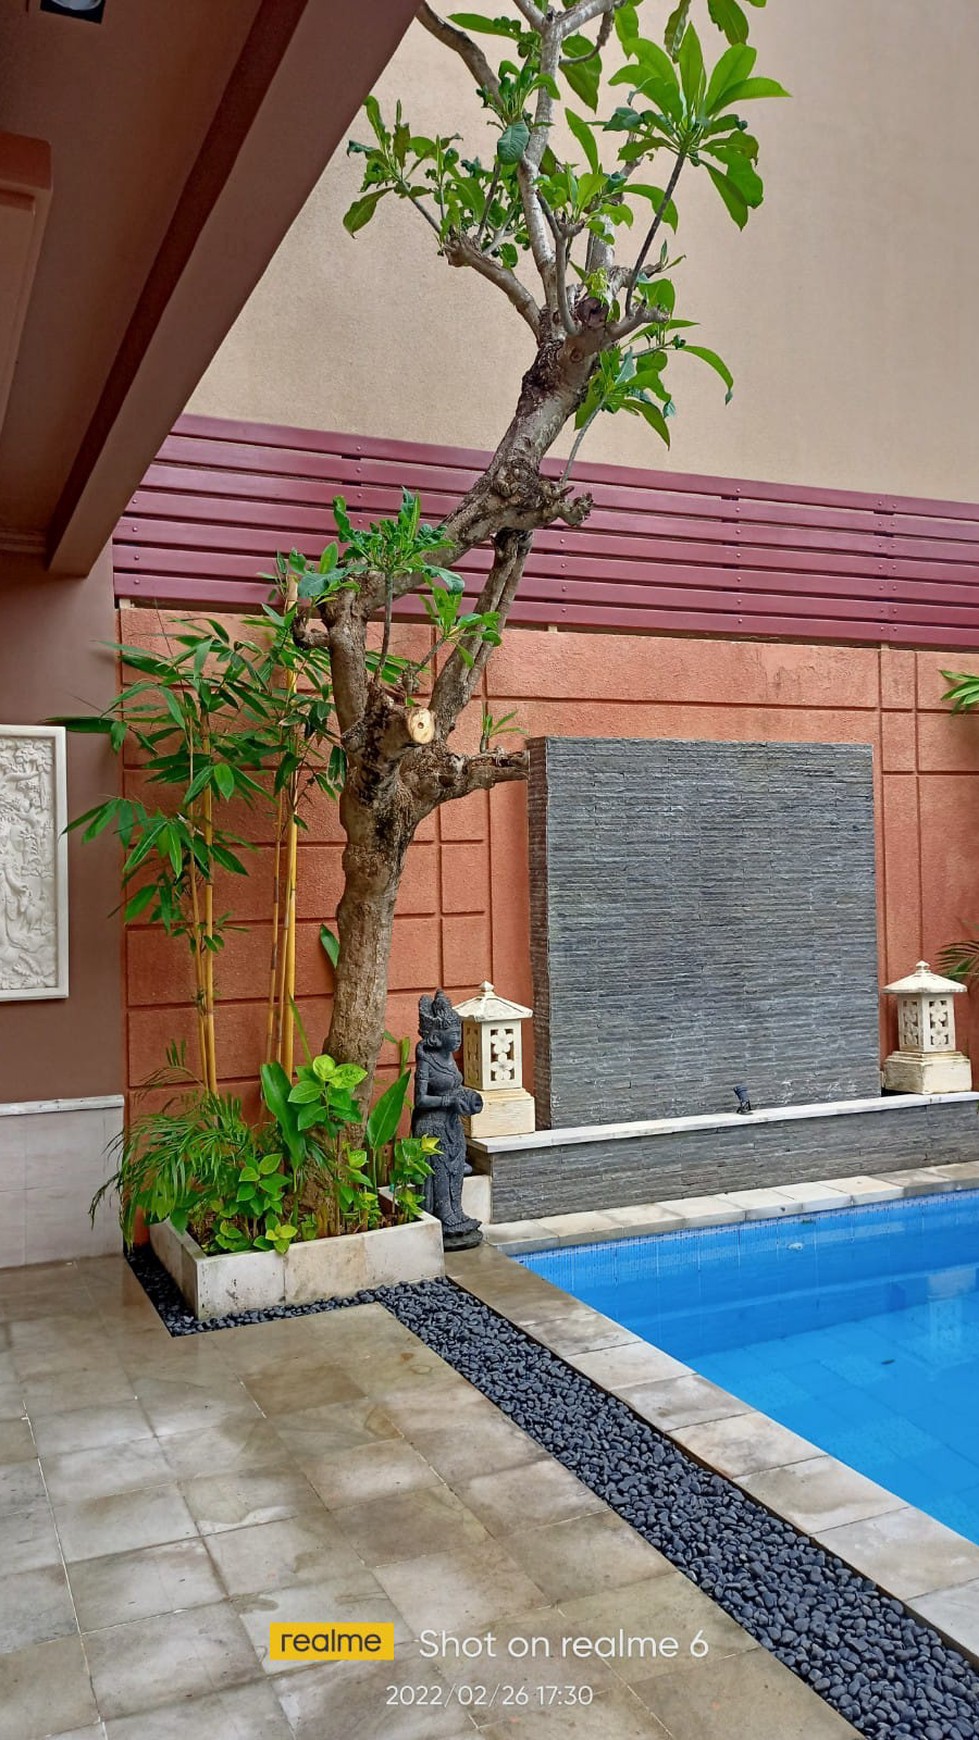 For Rent Yearly 3 Bed Room Villa in Jimbaran